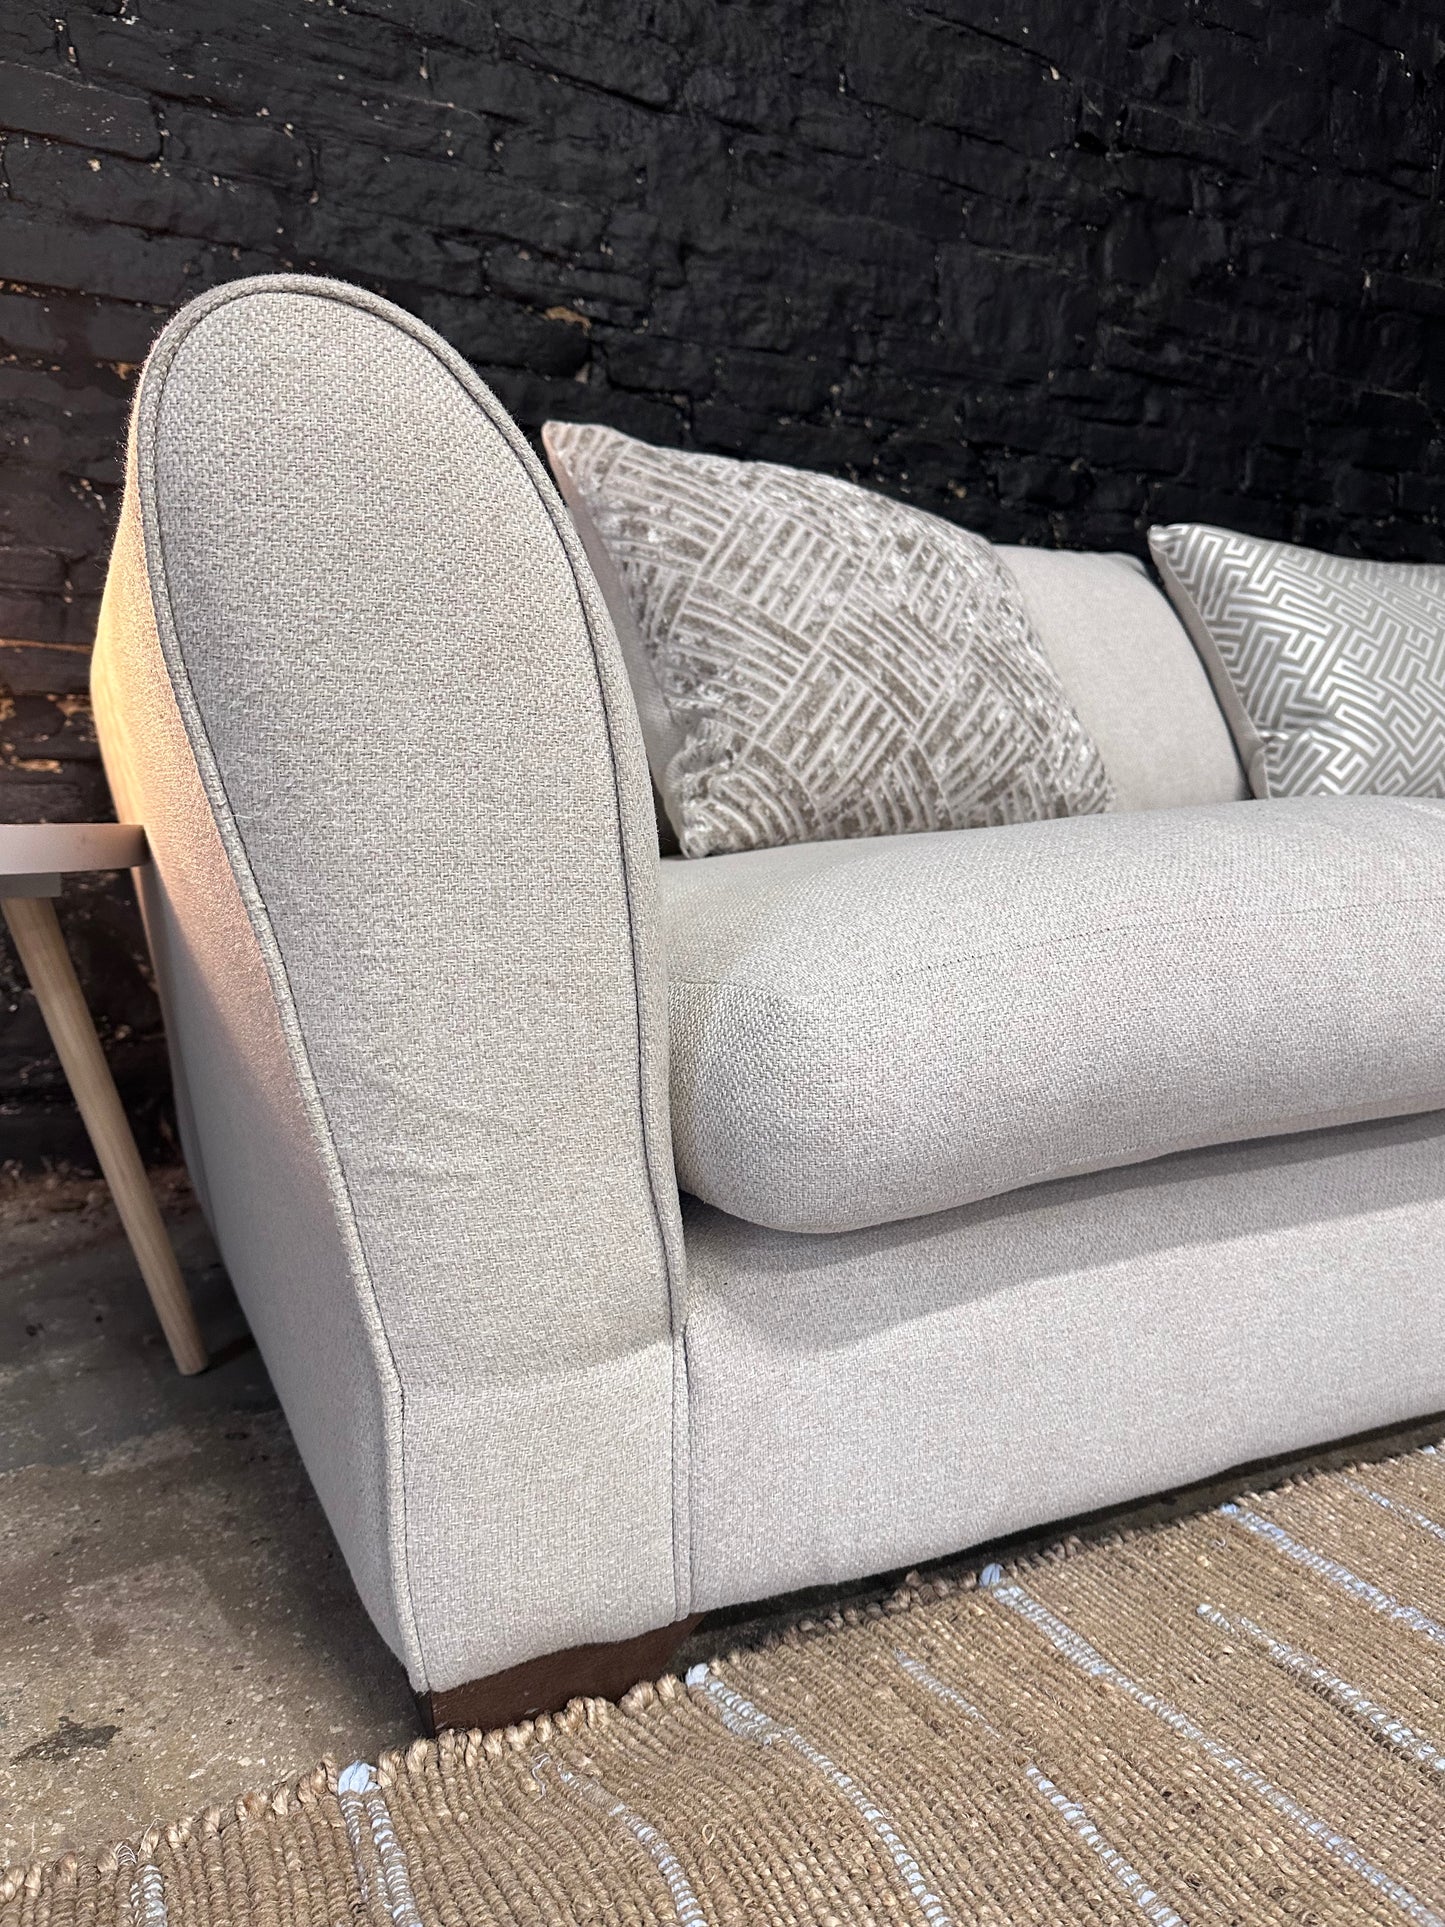 DFS Salcombe Large Sectional neutral light cream Fabric Right Hand Facing Corner Chaise Sofa

RRP-£3219 OUR PRICE £749